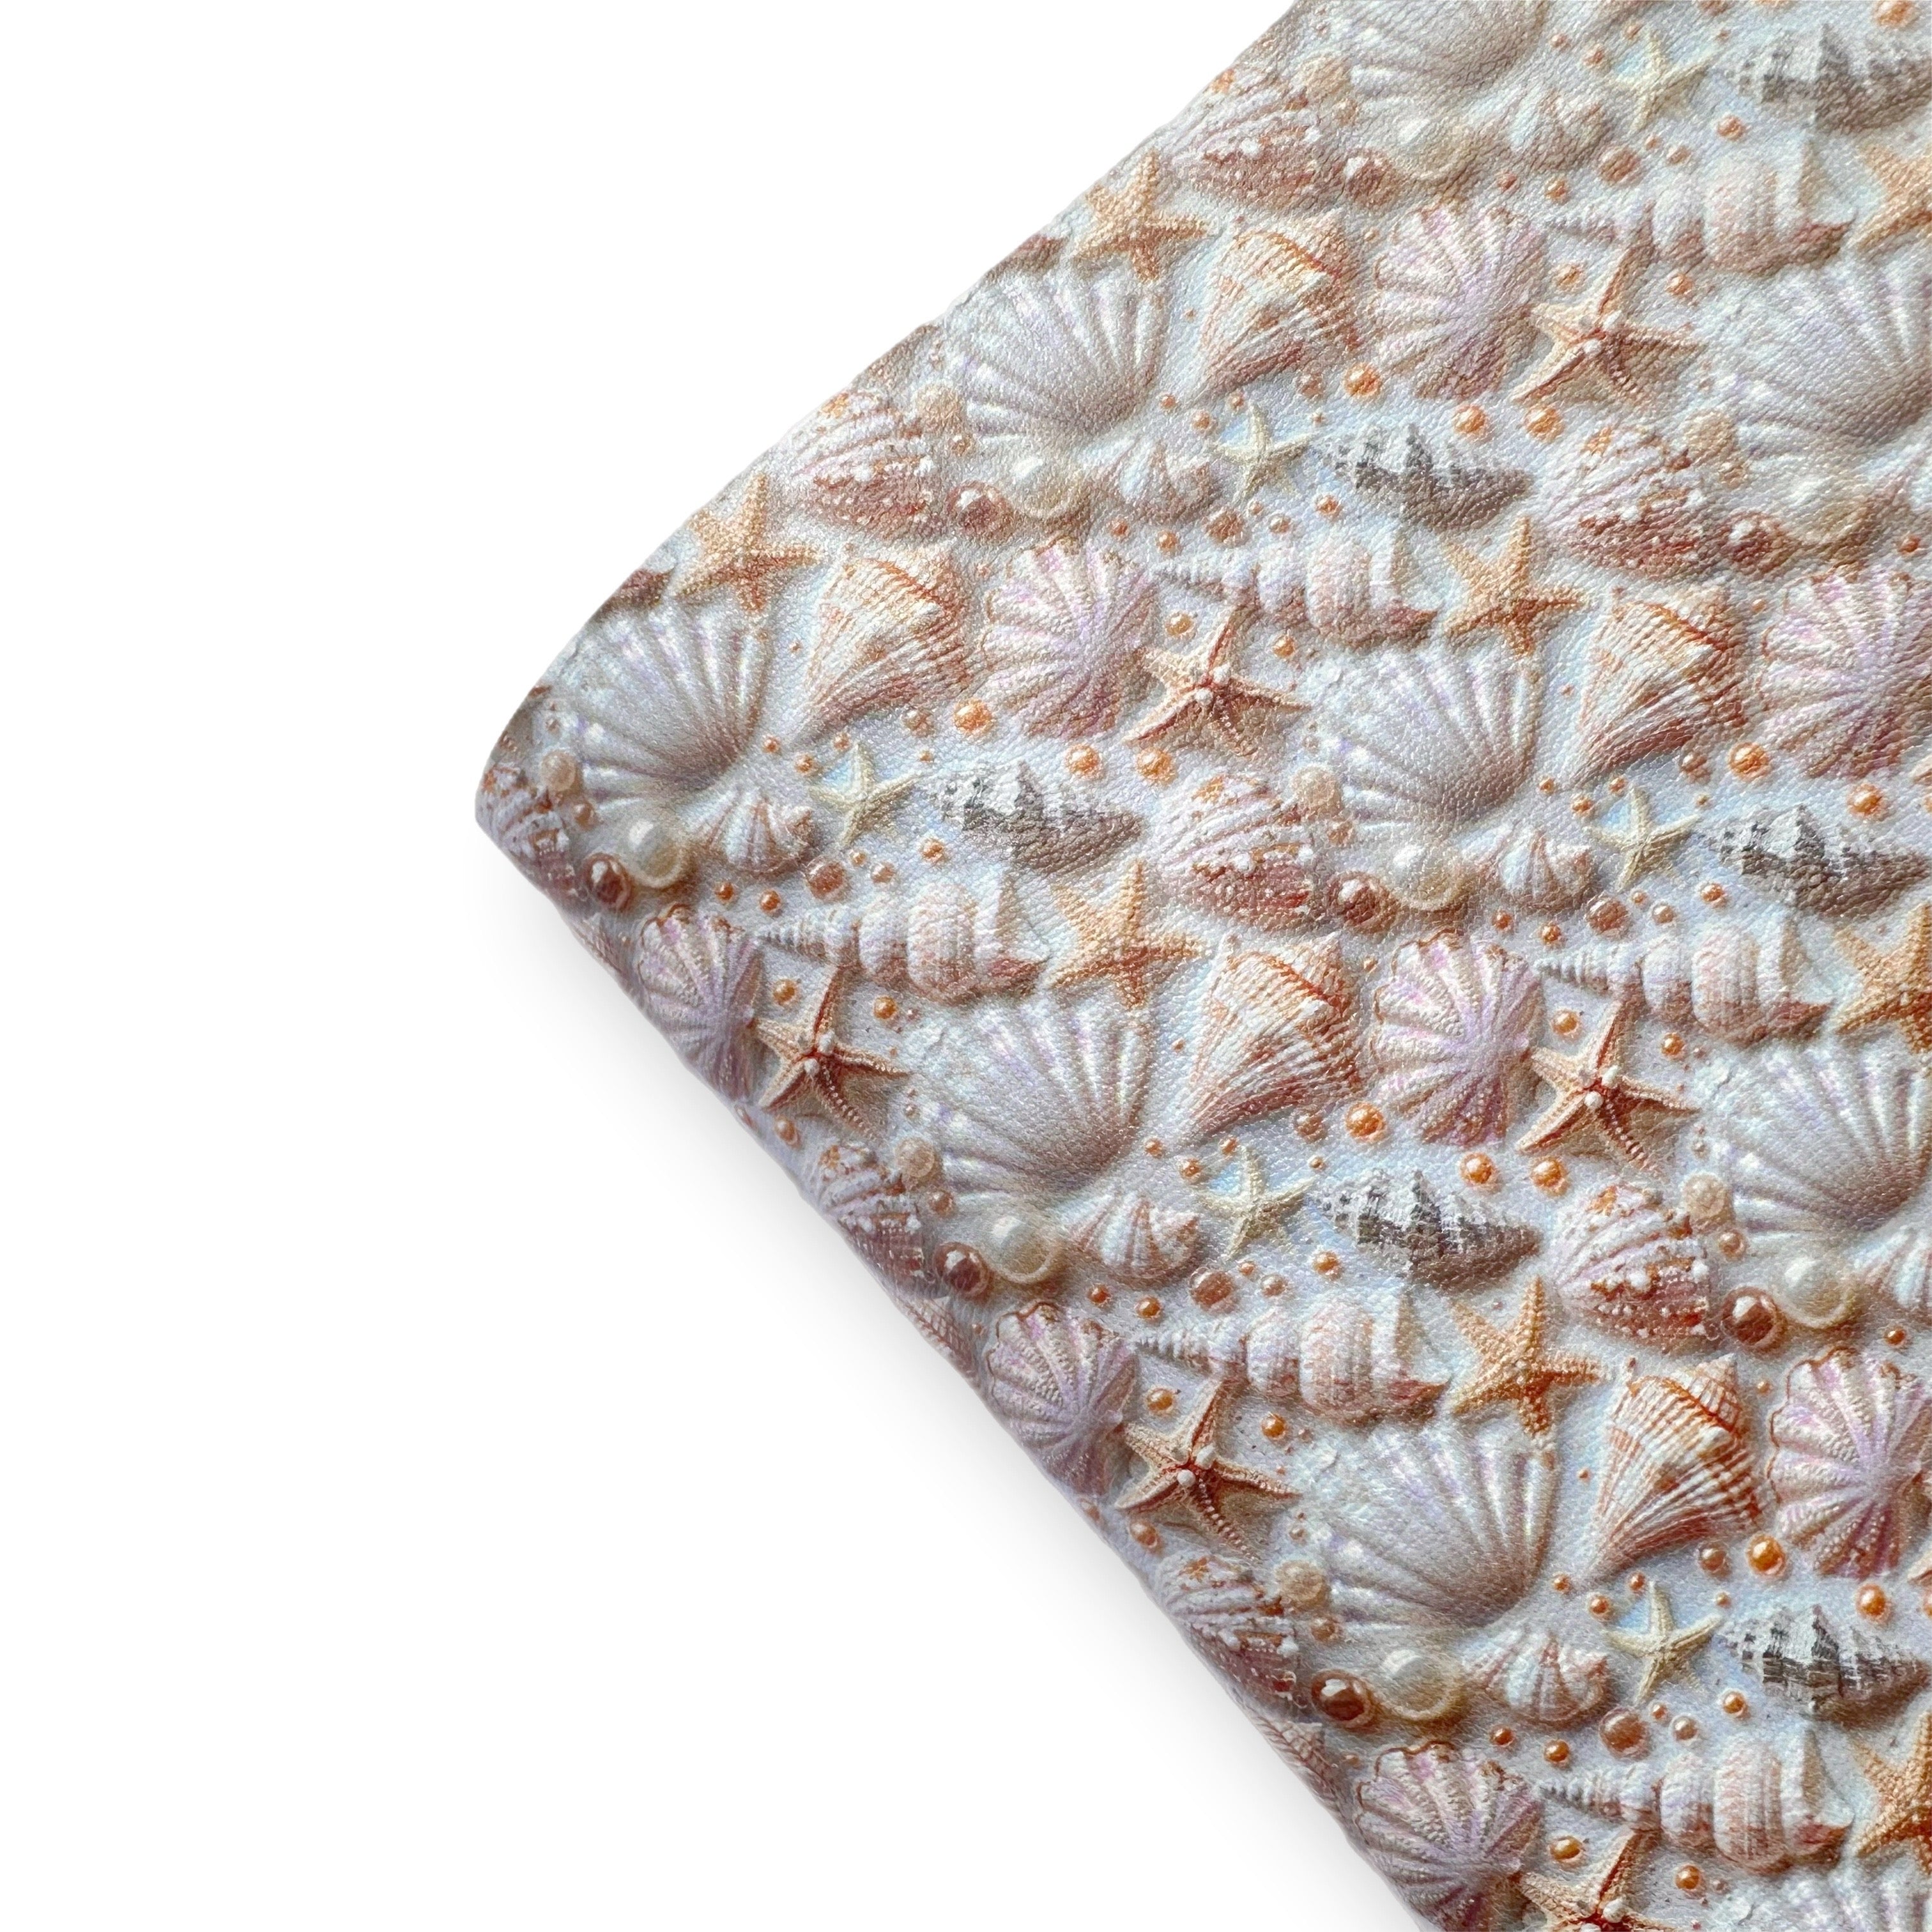 Pearl Shells Darling Premium Faux Leather Fabric